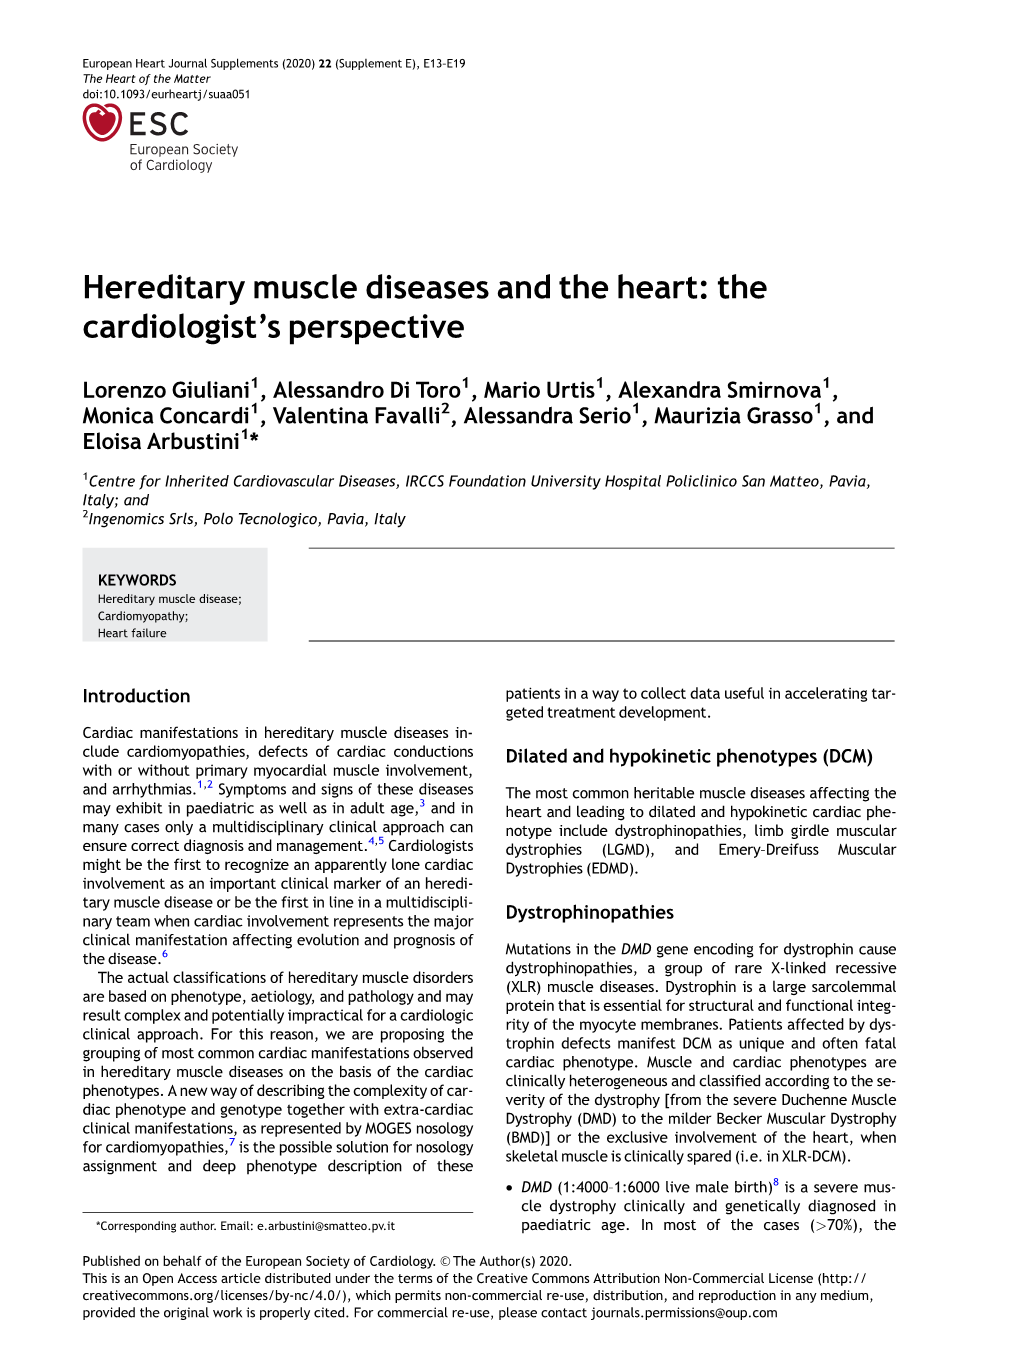 Hereditary Muscle Diseases and the Heart: the Cardiologist's Perspective